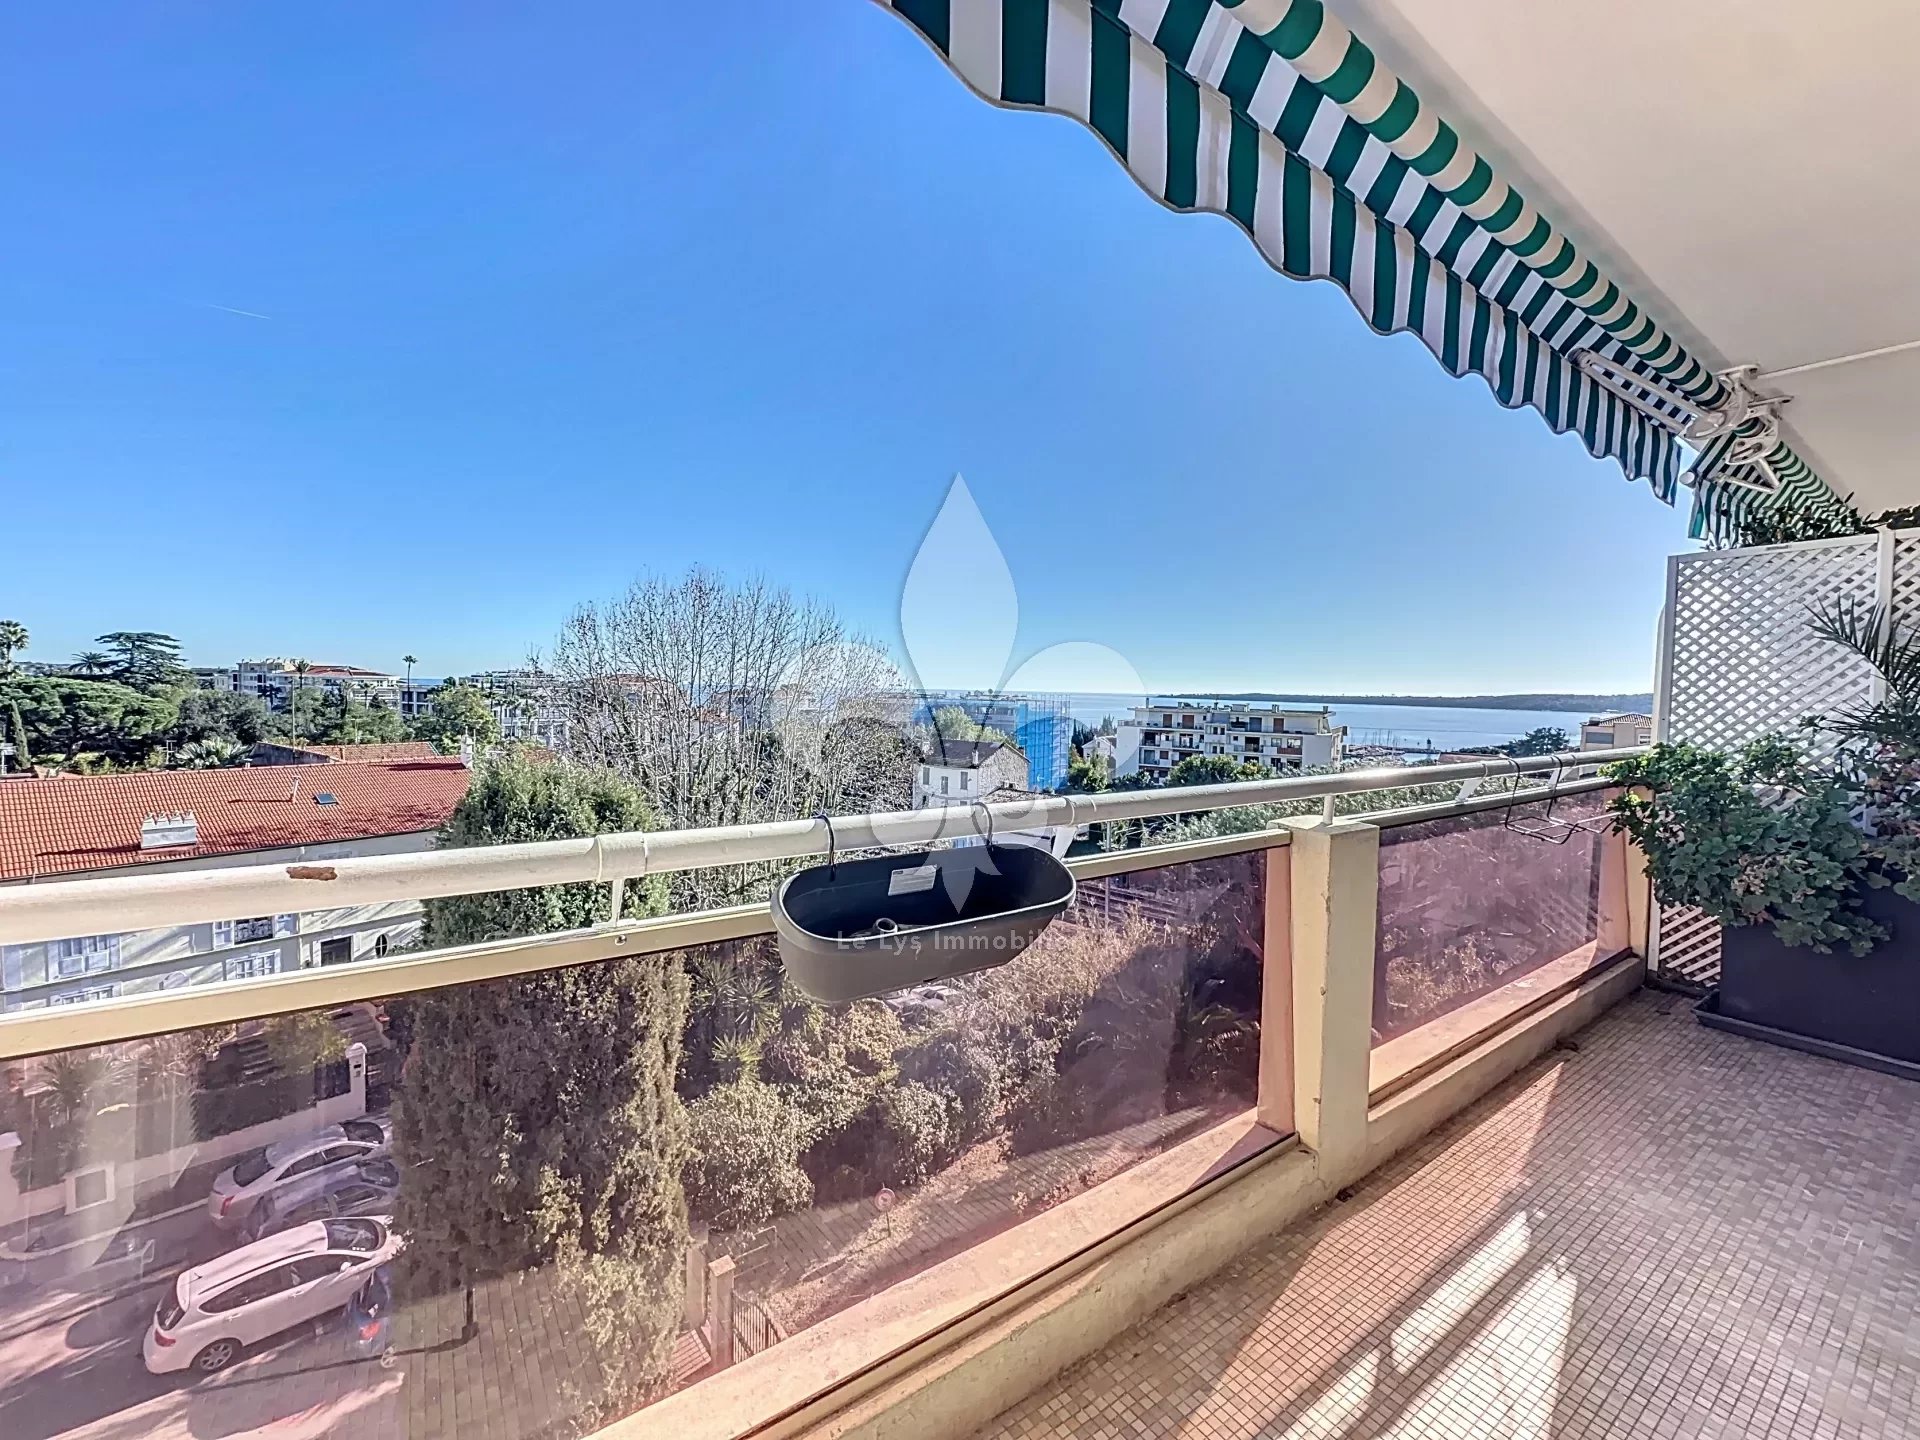 Cannes - Alexandre III: 2-room apartment with sea view